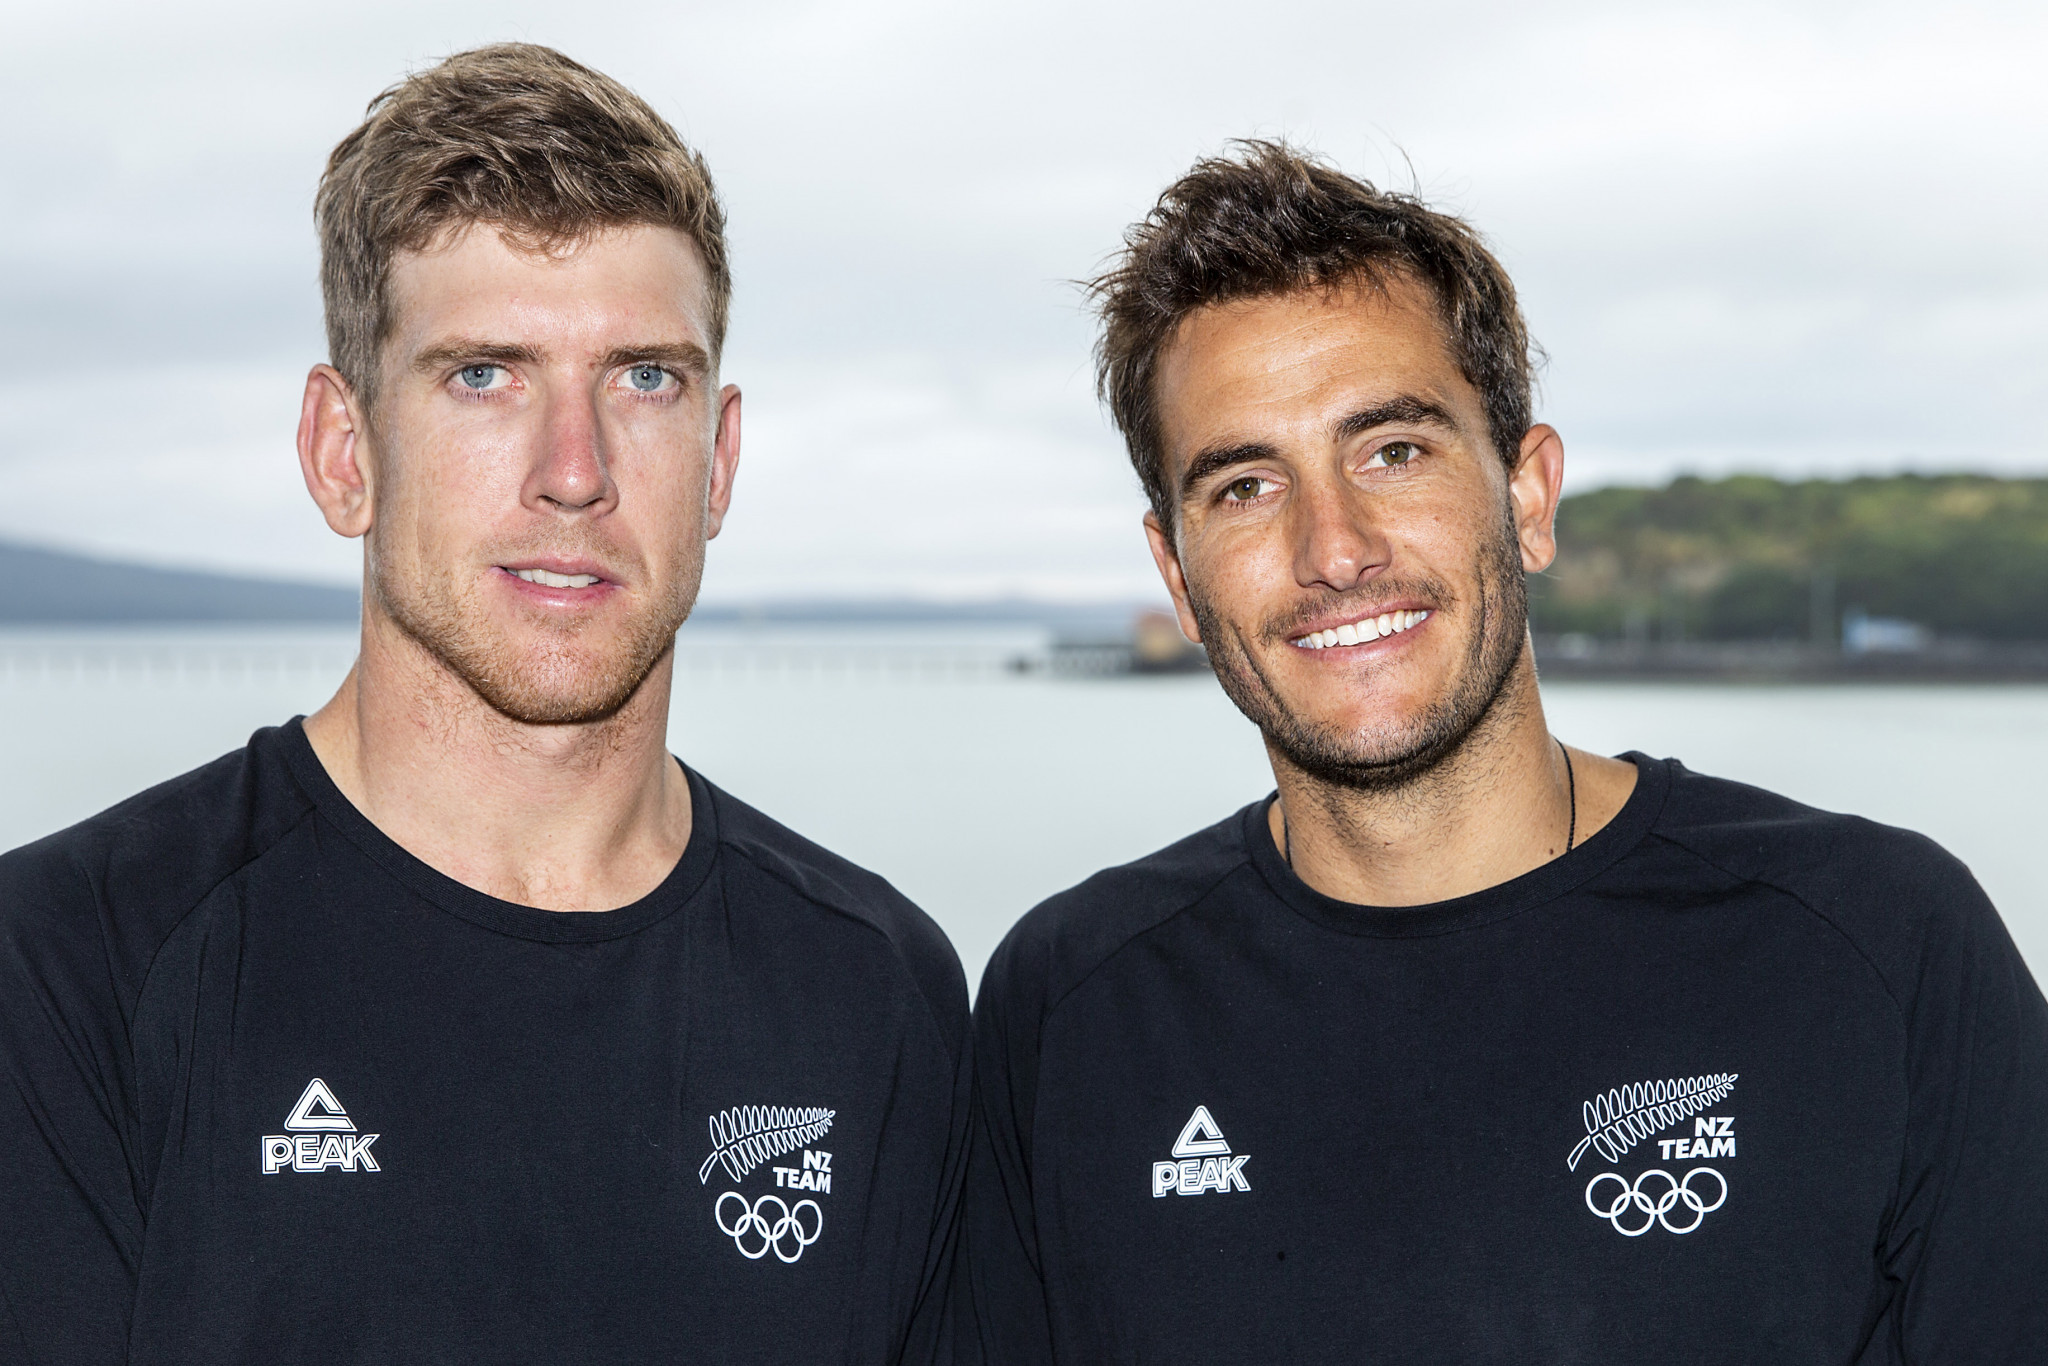 Seven sailors become New Zealand's first confirmed athletes for Tokyo 2020